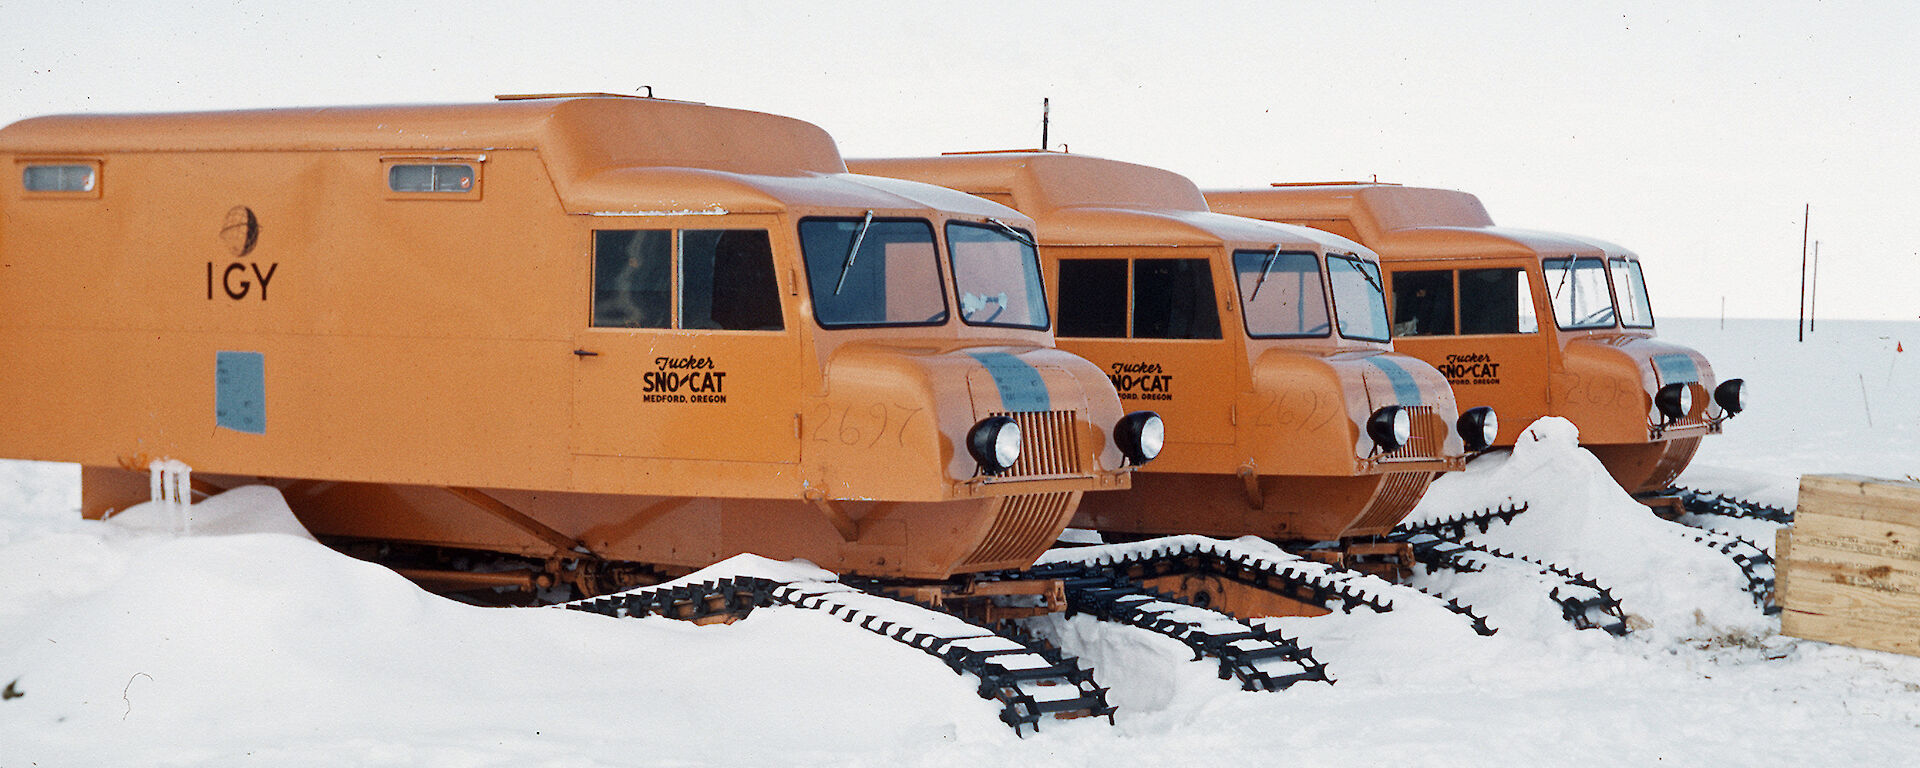 Snow cats used by Australia during the International Geophysical Year